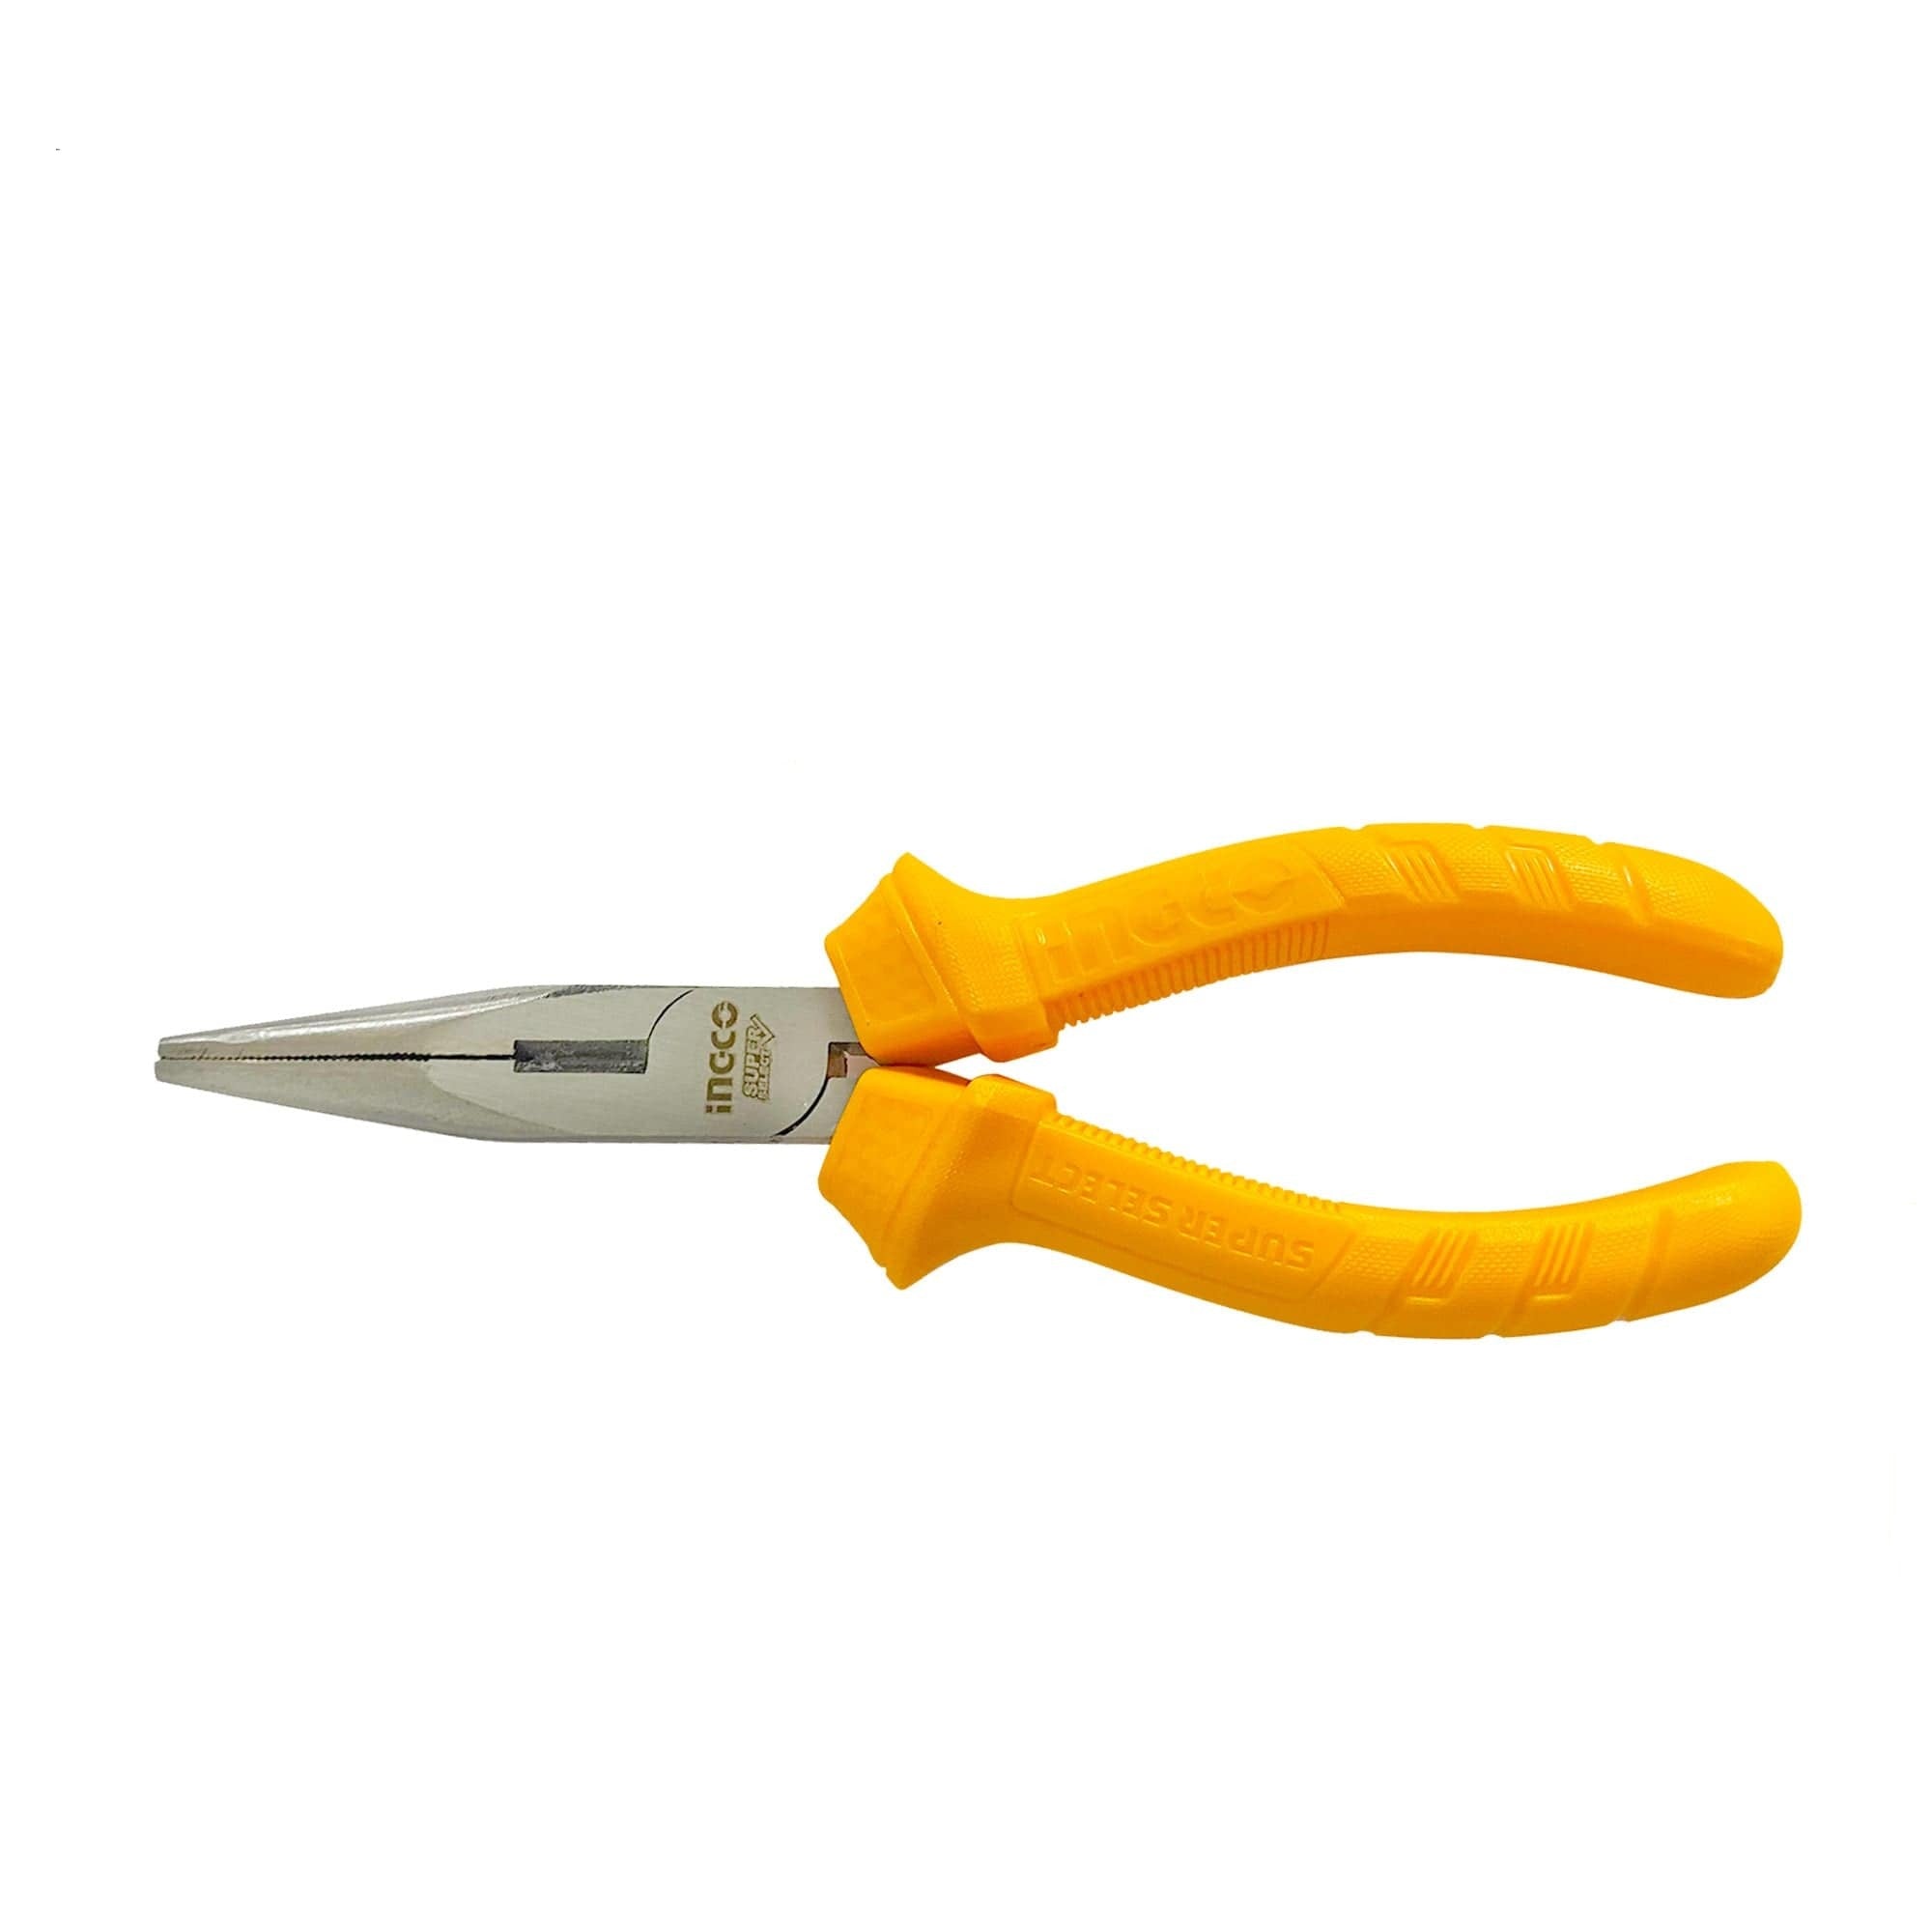 Ingco Long Nose Plier 6" - HLNP12160 | Supply Master | Accra, Ghana Pliers Buy Tools hardware Building materials